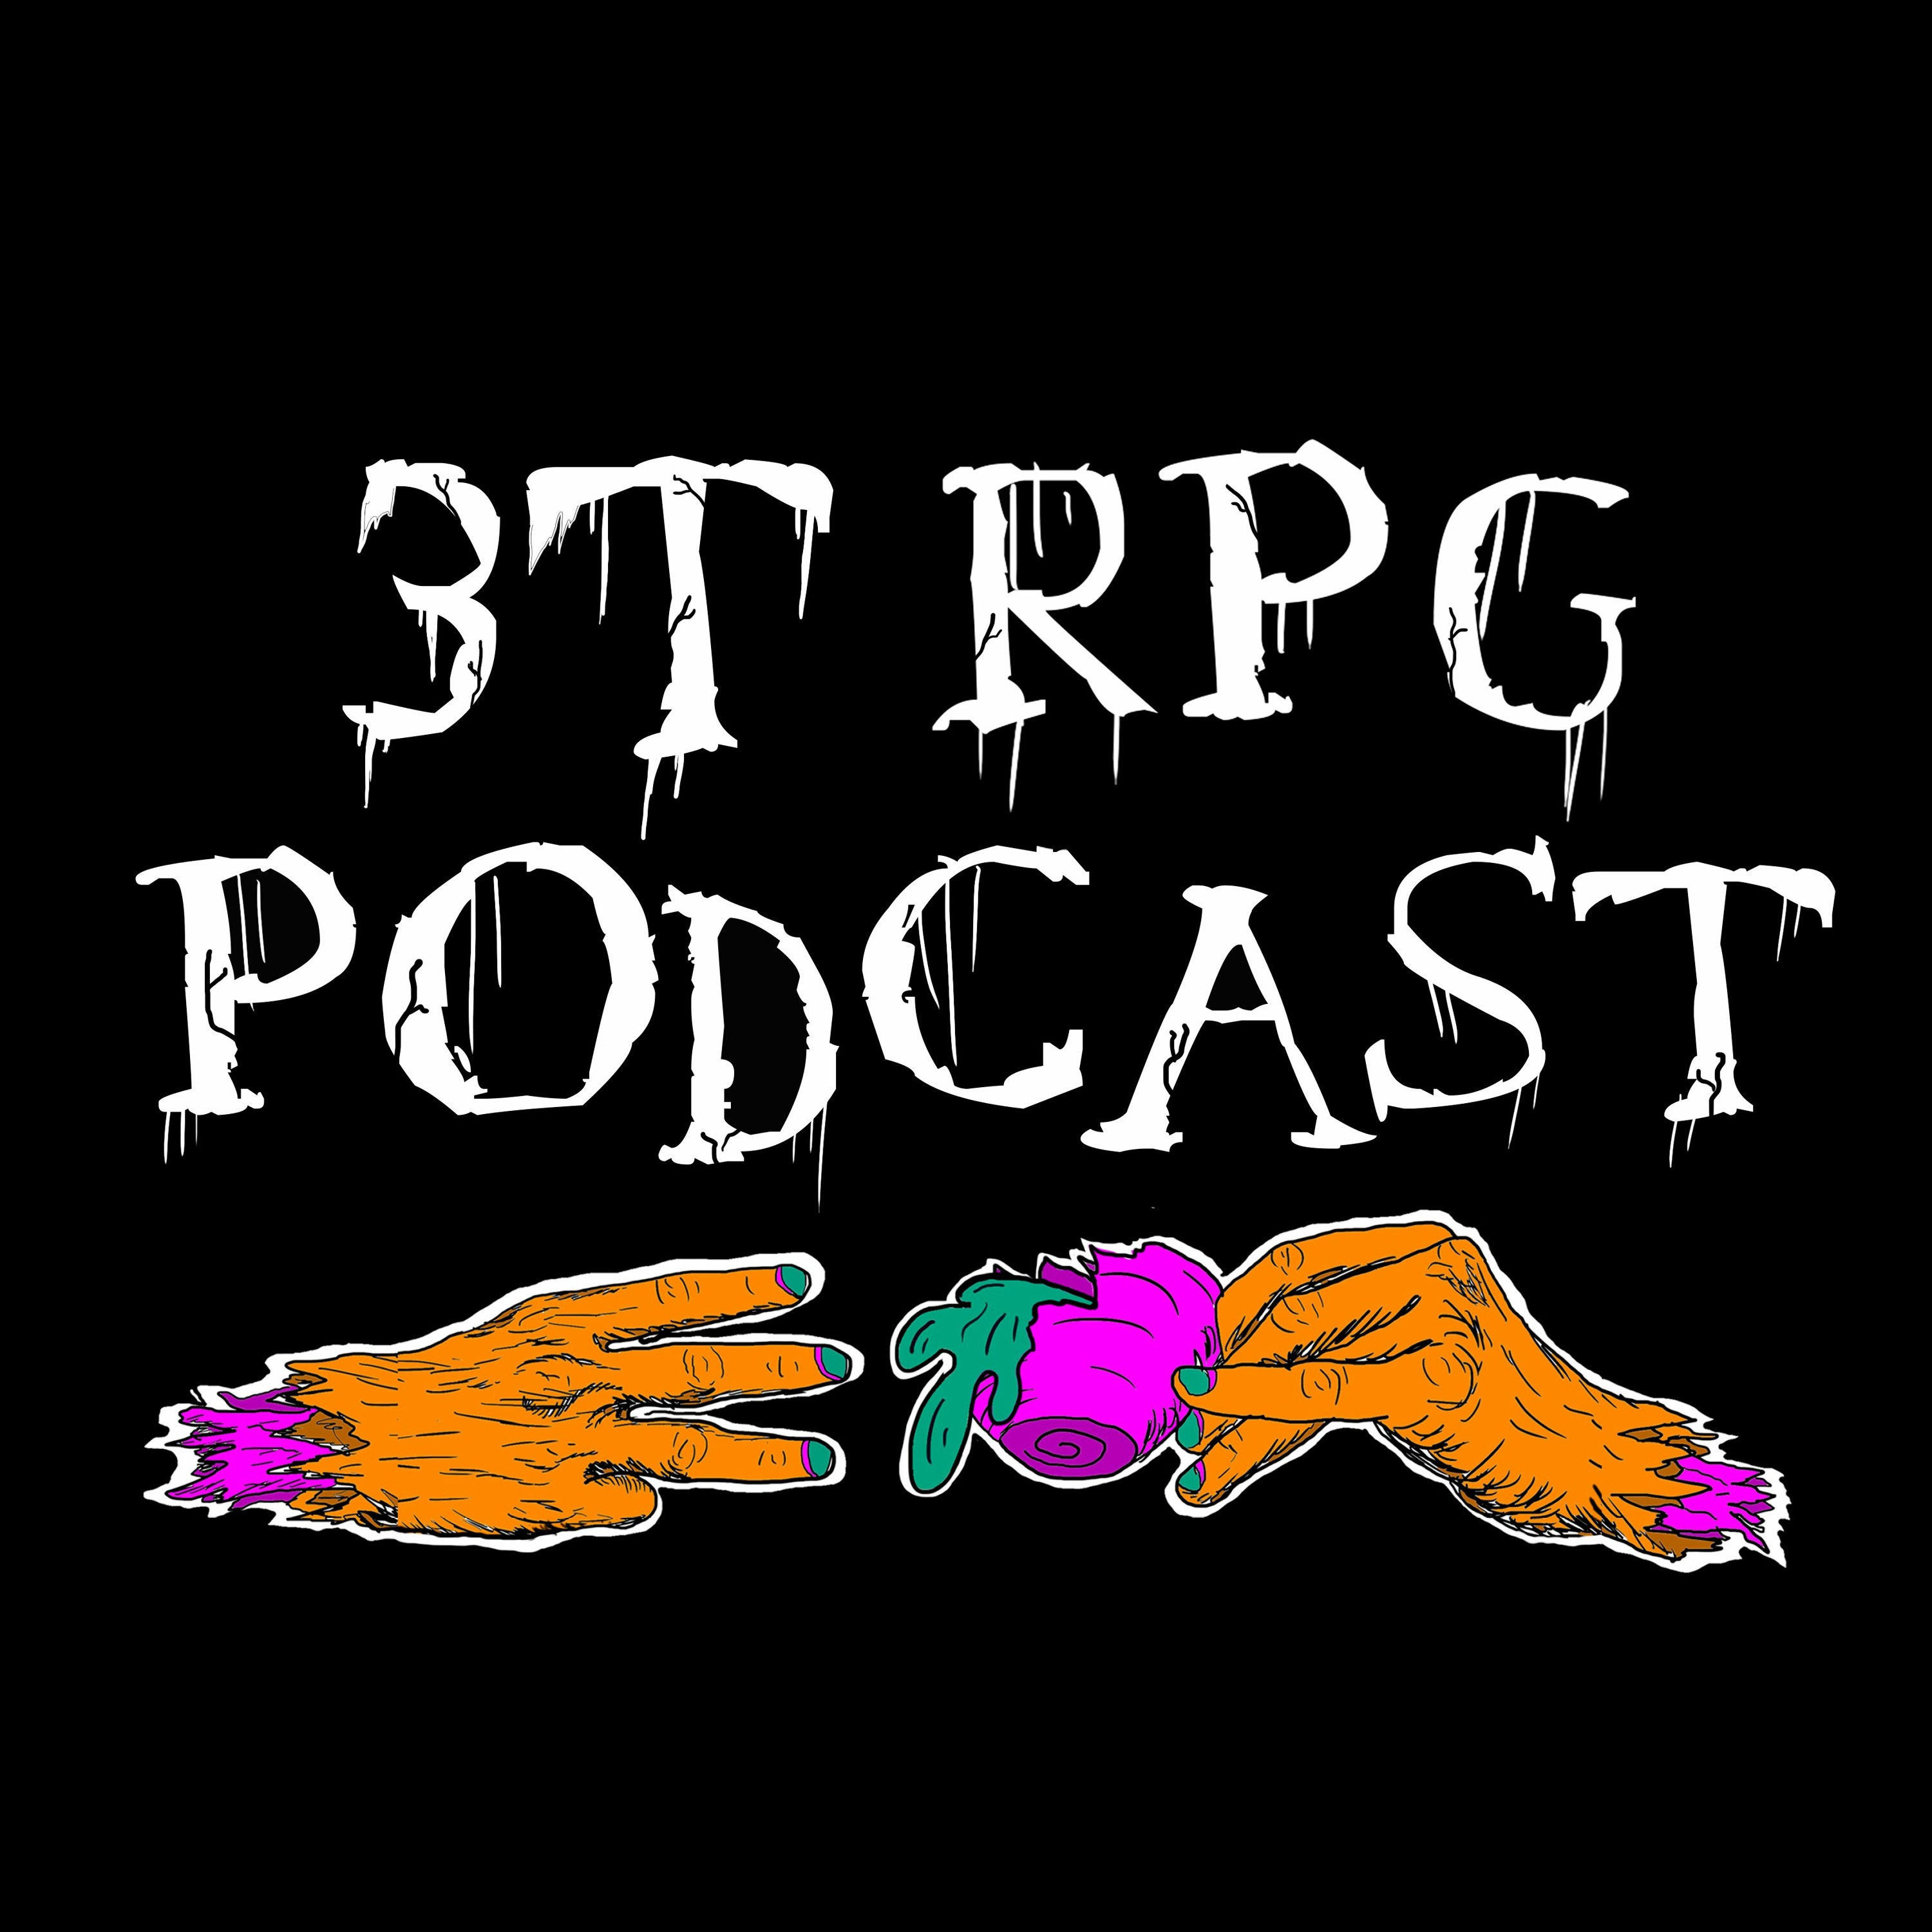 093 - How to cheat at RPGs